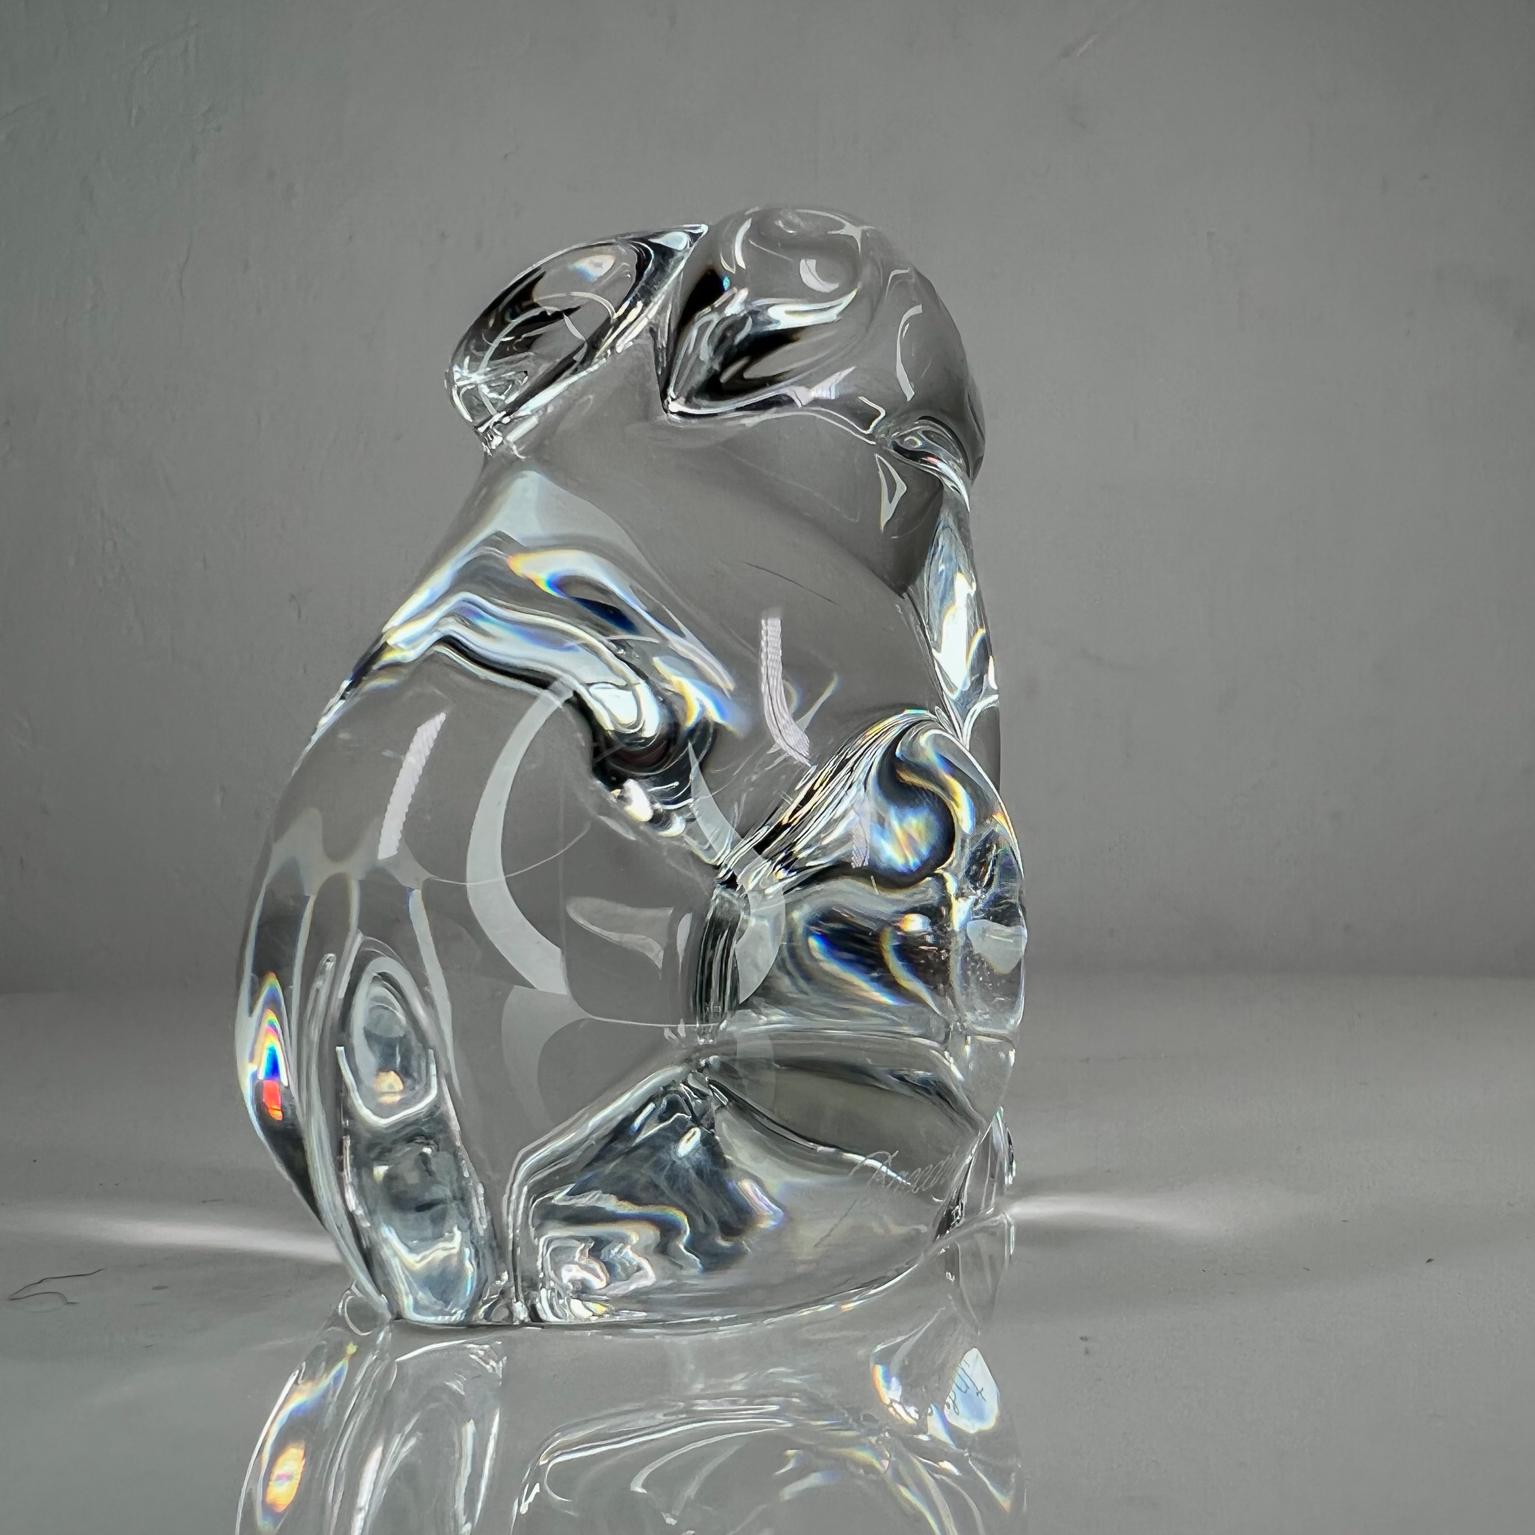 1980s French Bunny Rabbit Paperweight Baccarat Crystal Sculpture  9